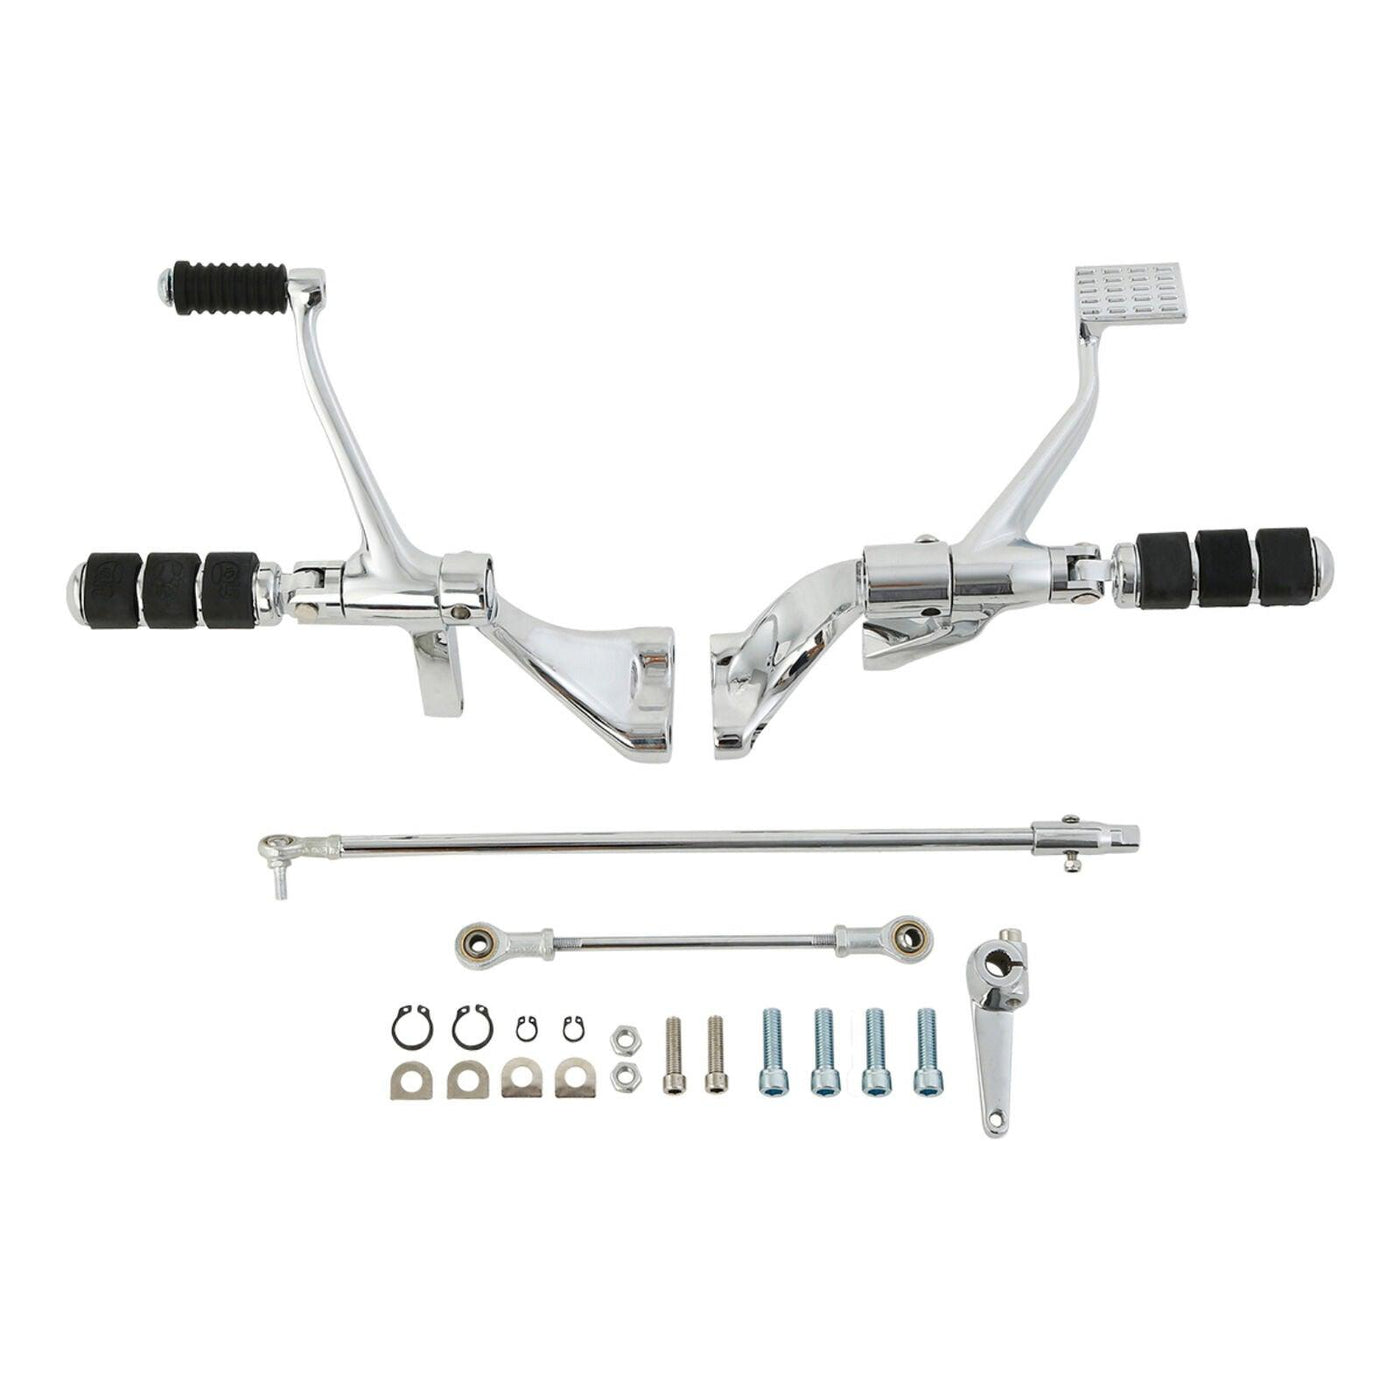 Forward Controls Pegs Levers Linkages For Harley Sportster 883 1200 14-Up Chrome - Moto Life Products